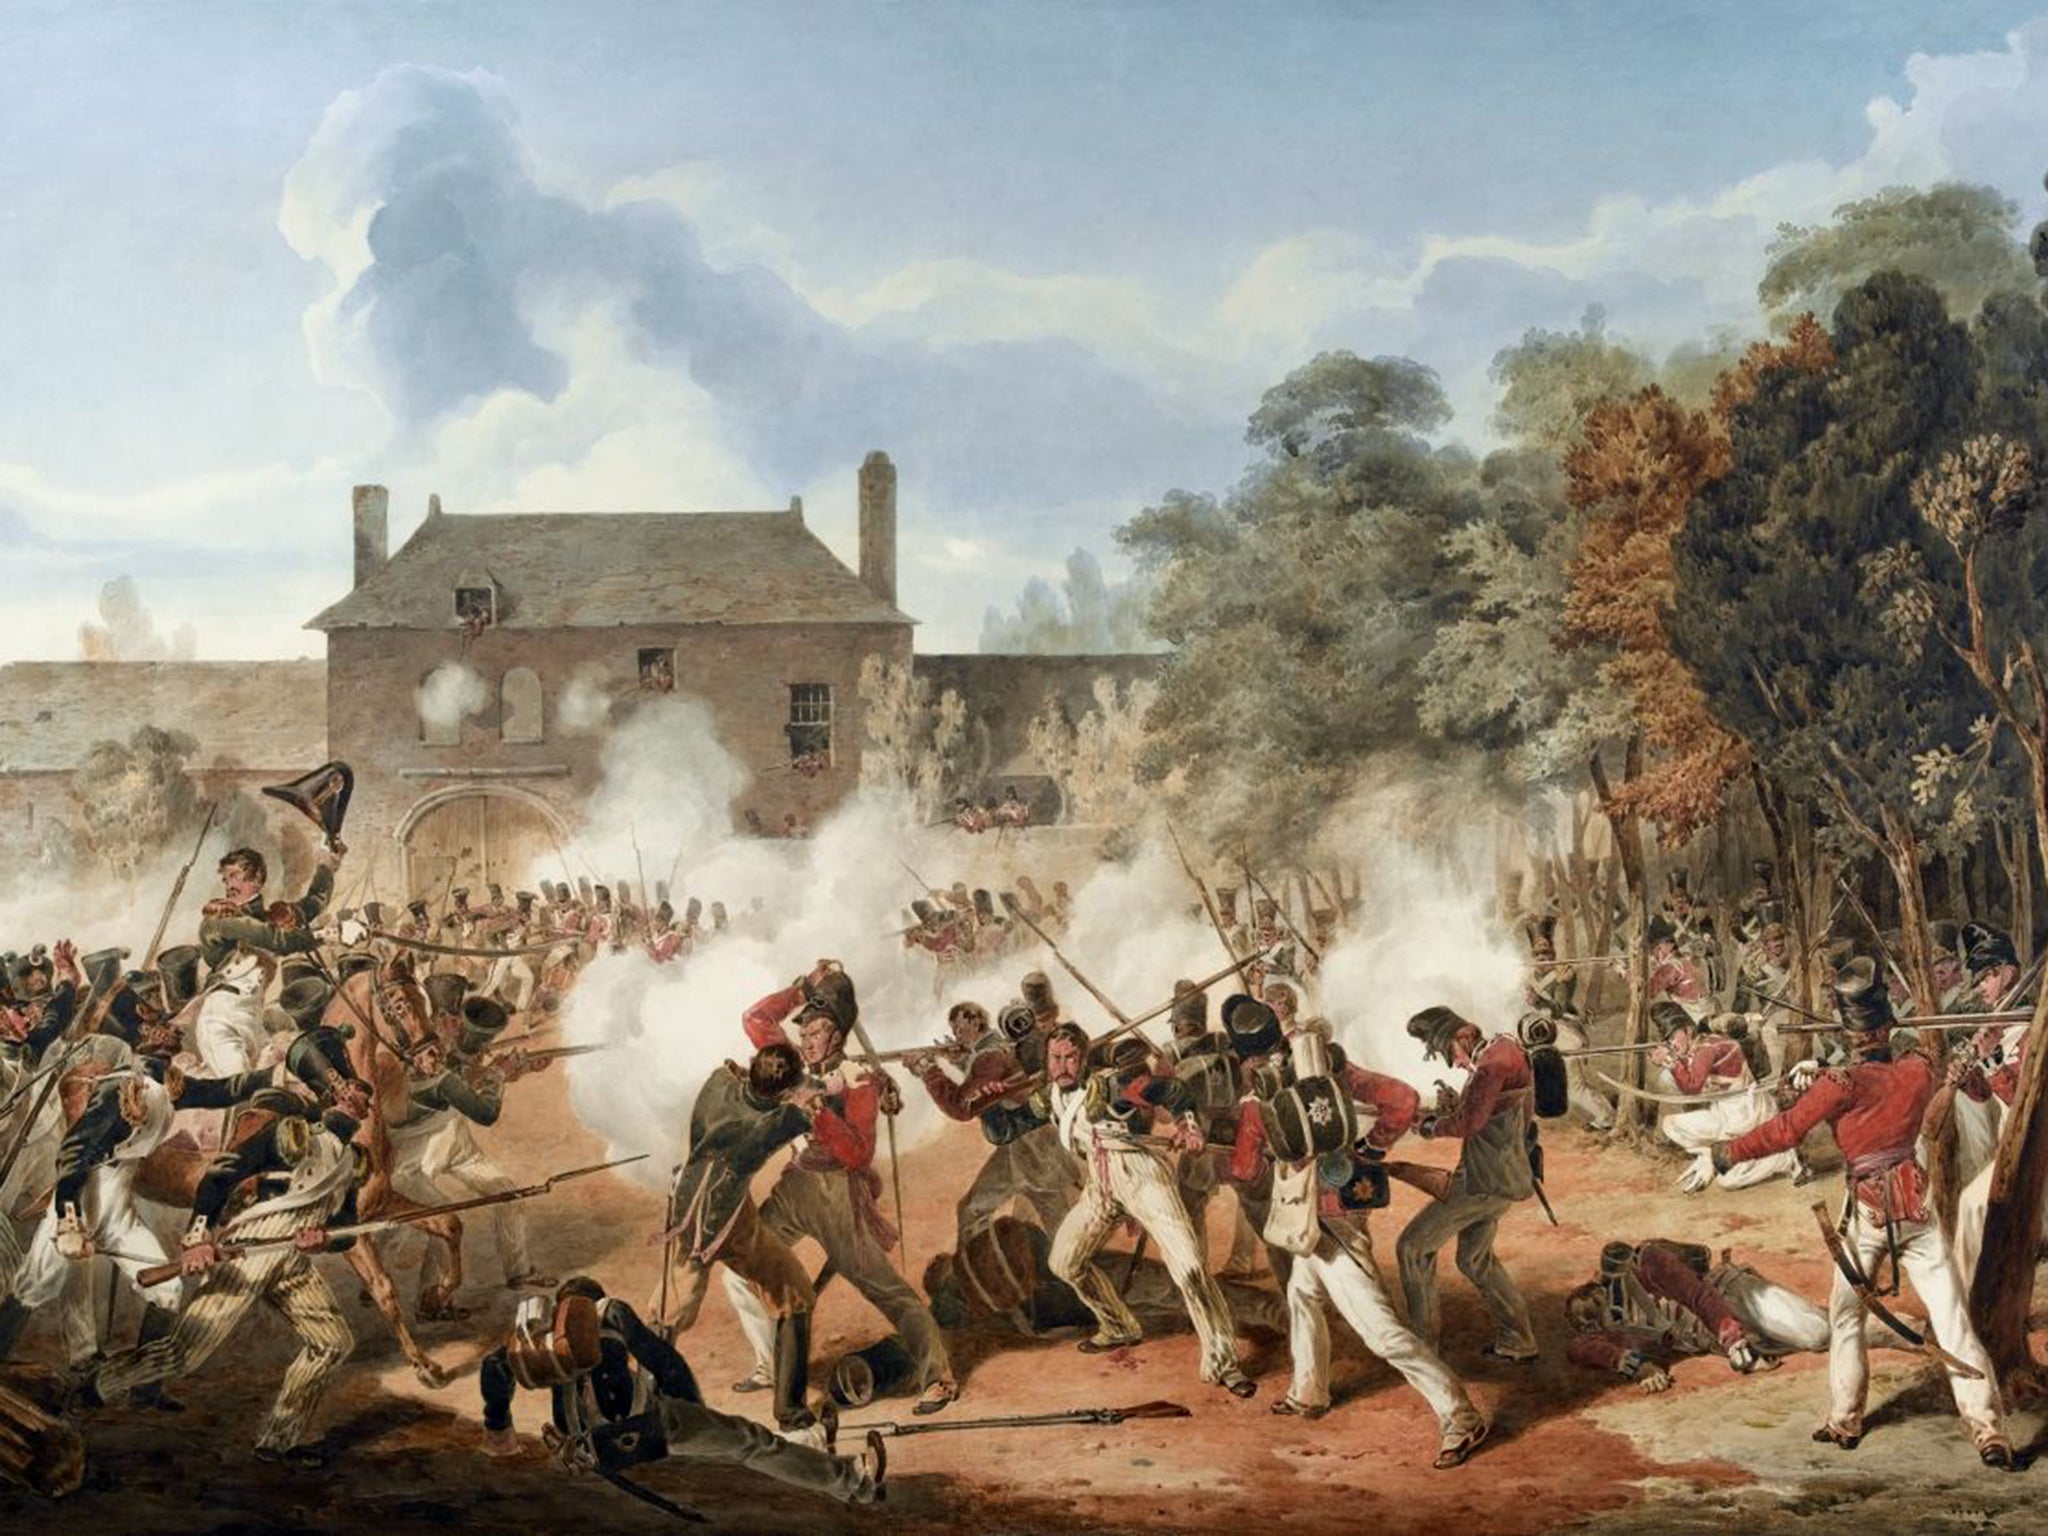 Denis Dighton’s painting of the Coldstream Guards defending Hougoumont